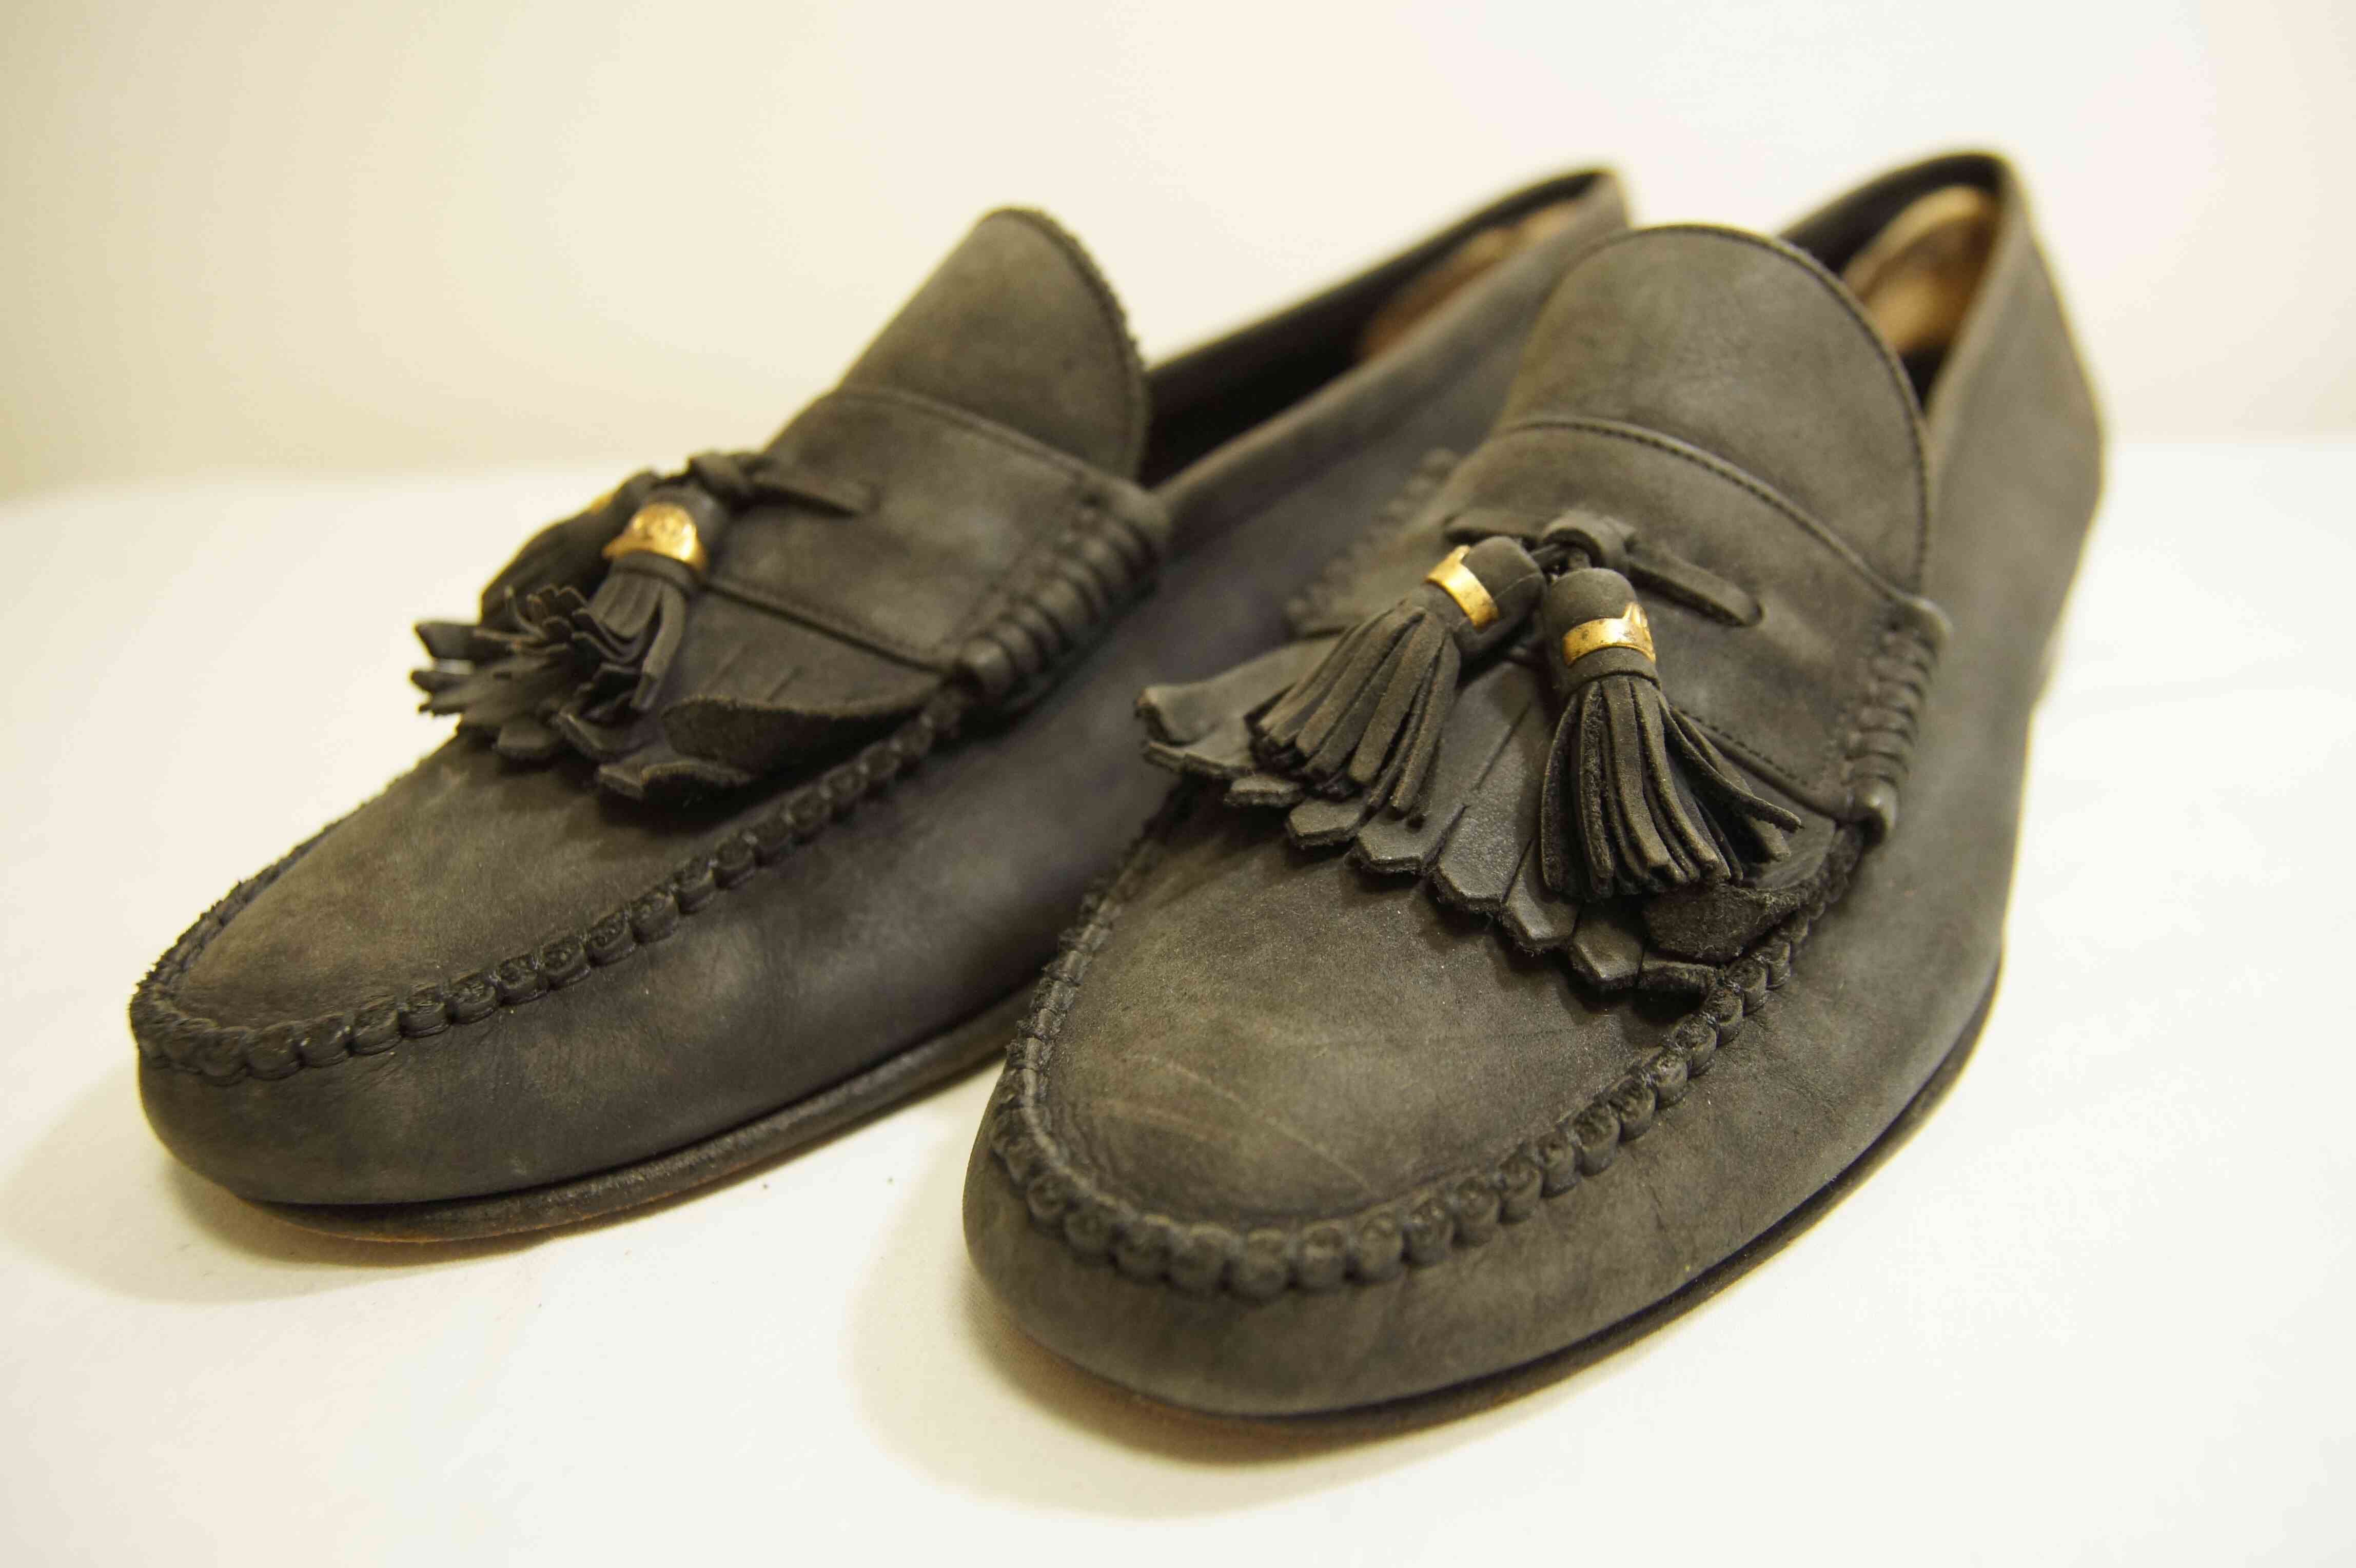 OLD GUCCI] Suede Tasseled Loafer スエードタッセルローファー Italy